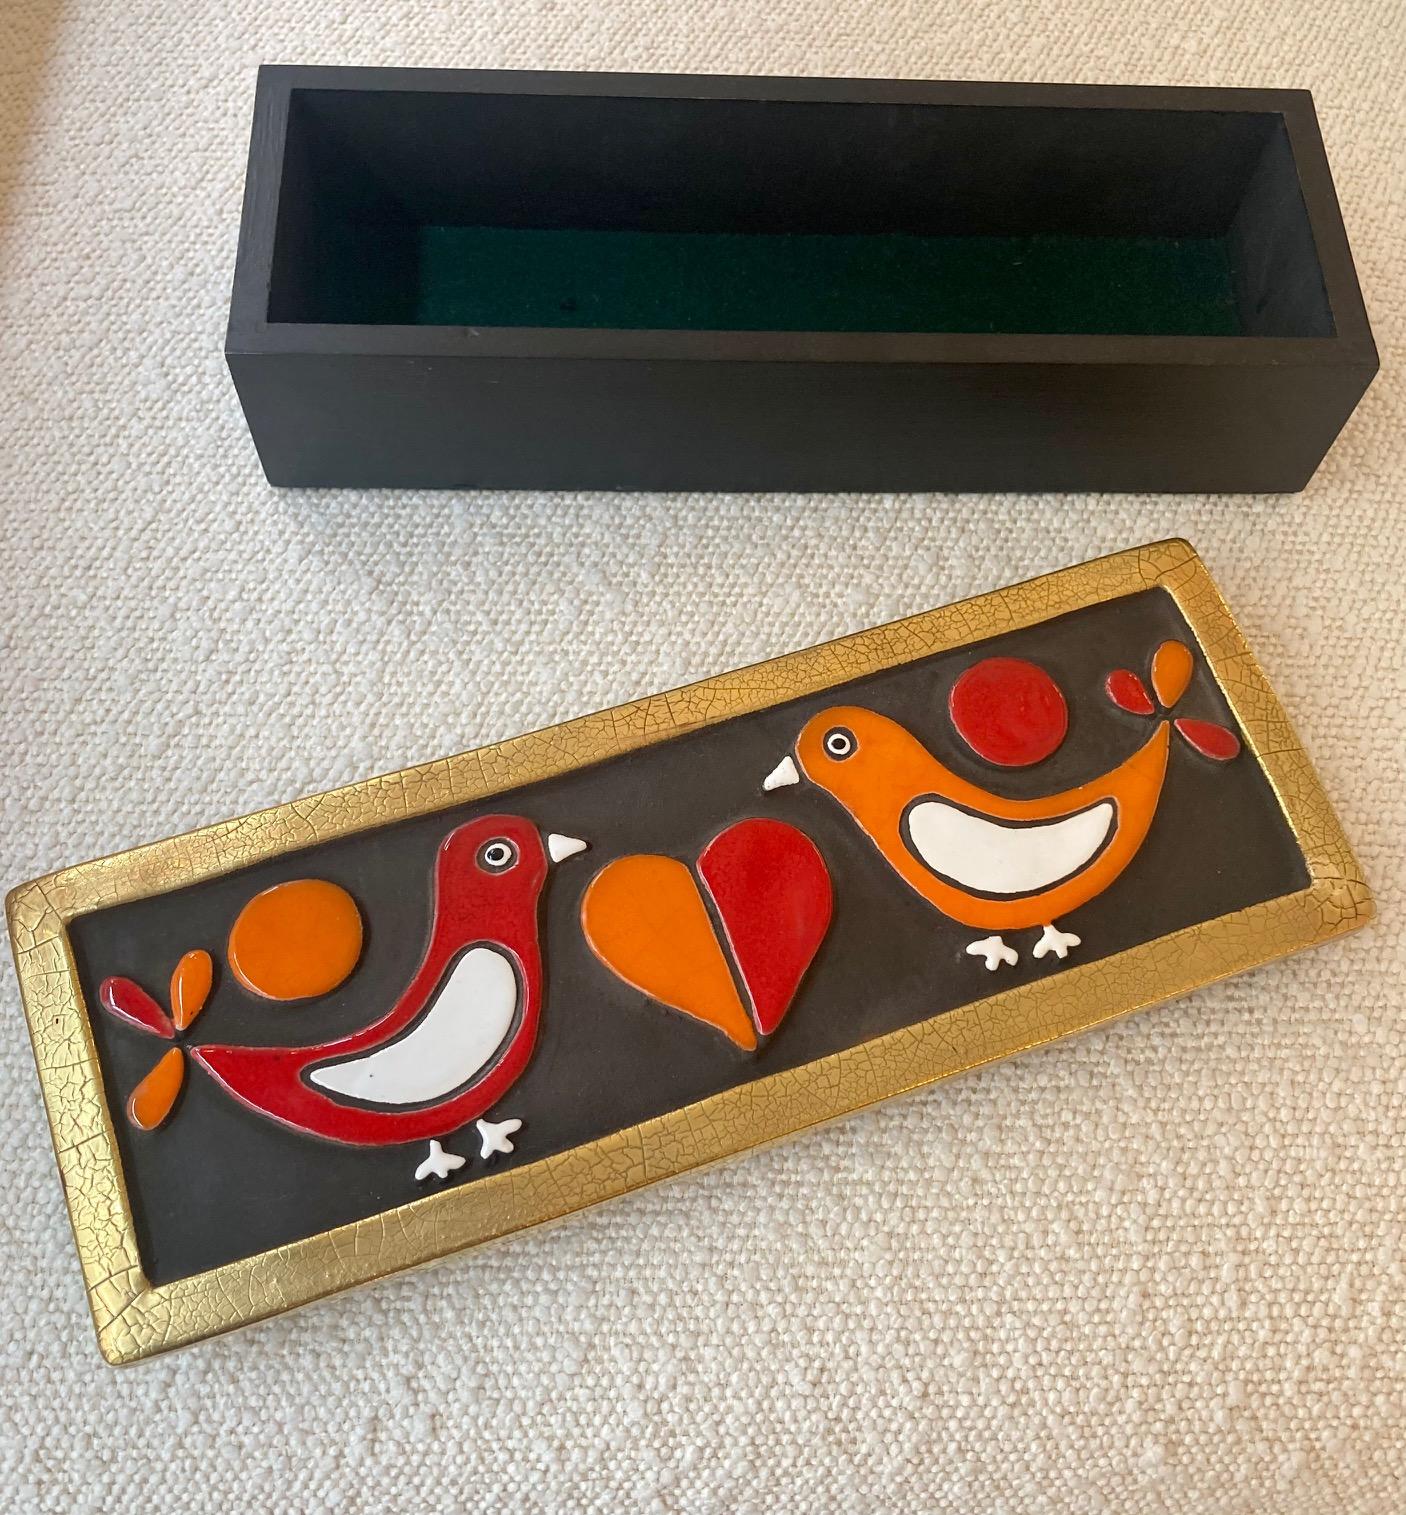 An enameled ceramic box sporting 2 doves facing each other and a heart in the middle.
Embossed earthenware enameled in red, orange and white on a black background. 
Crackled gold edges. 
the base of the box is in wood
Model 